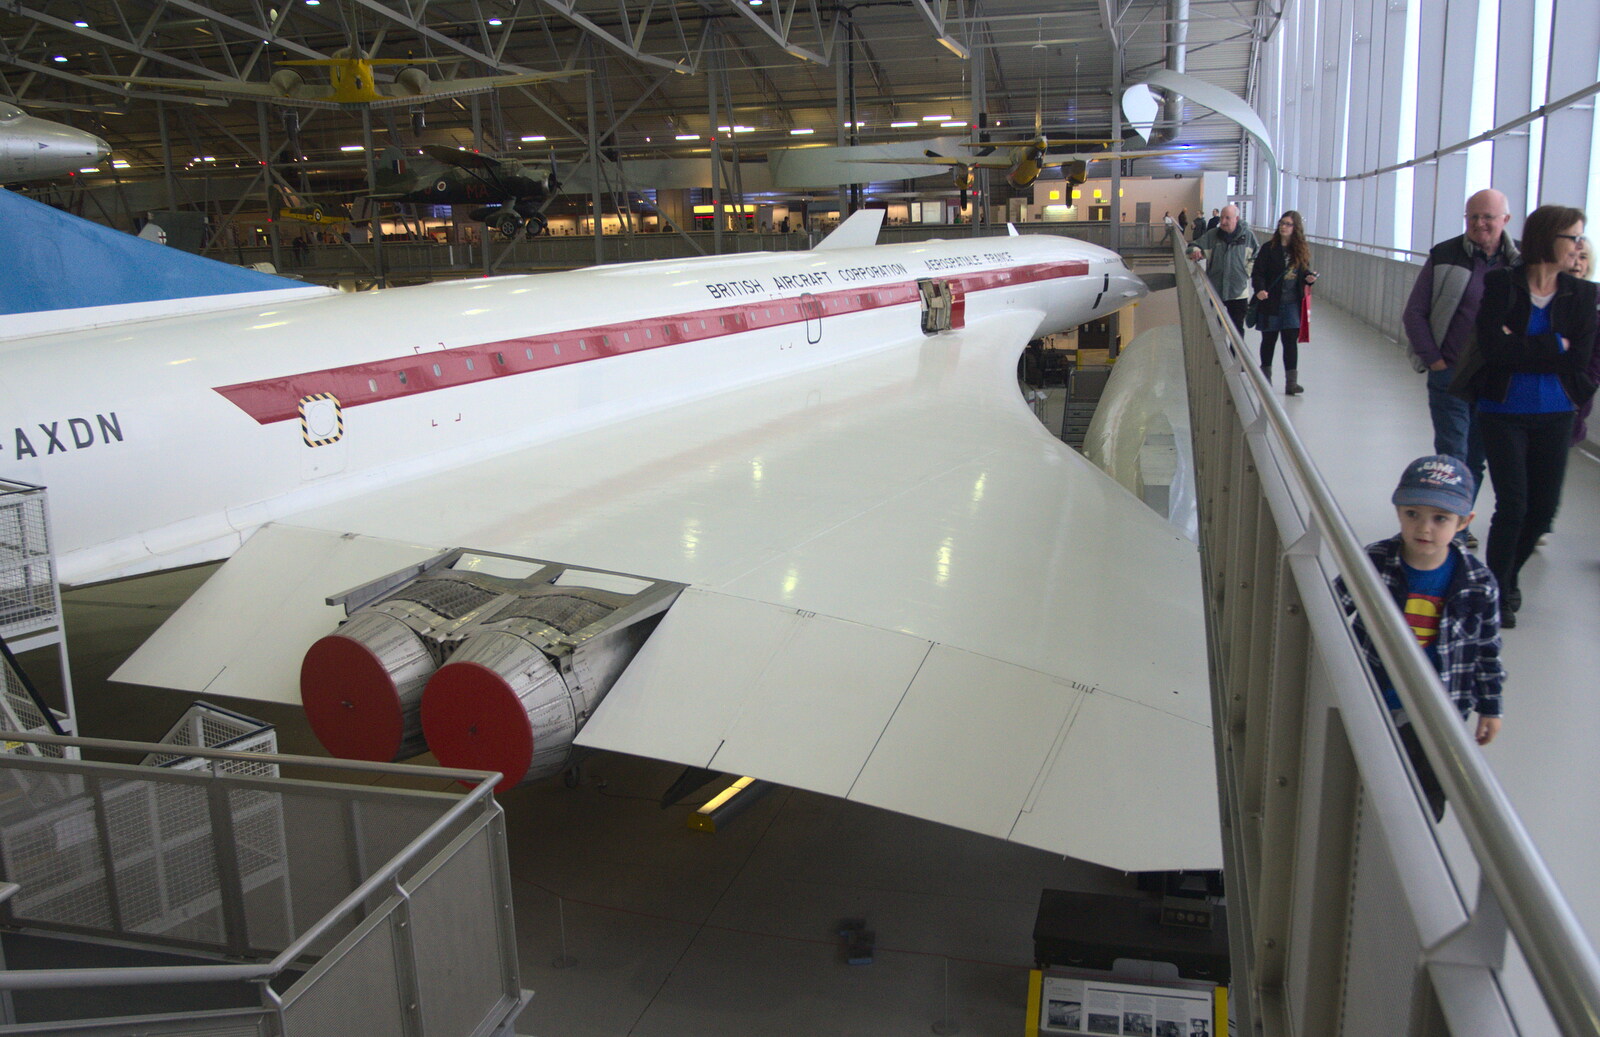 A top view of Concorde from A Day Out at Duxford, Cambridgeshire - 9th March 2014